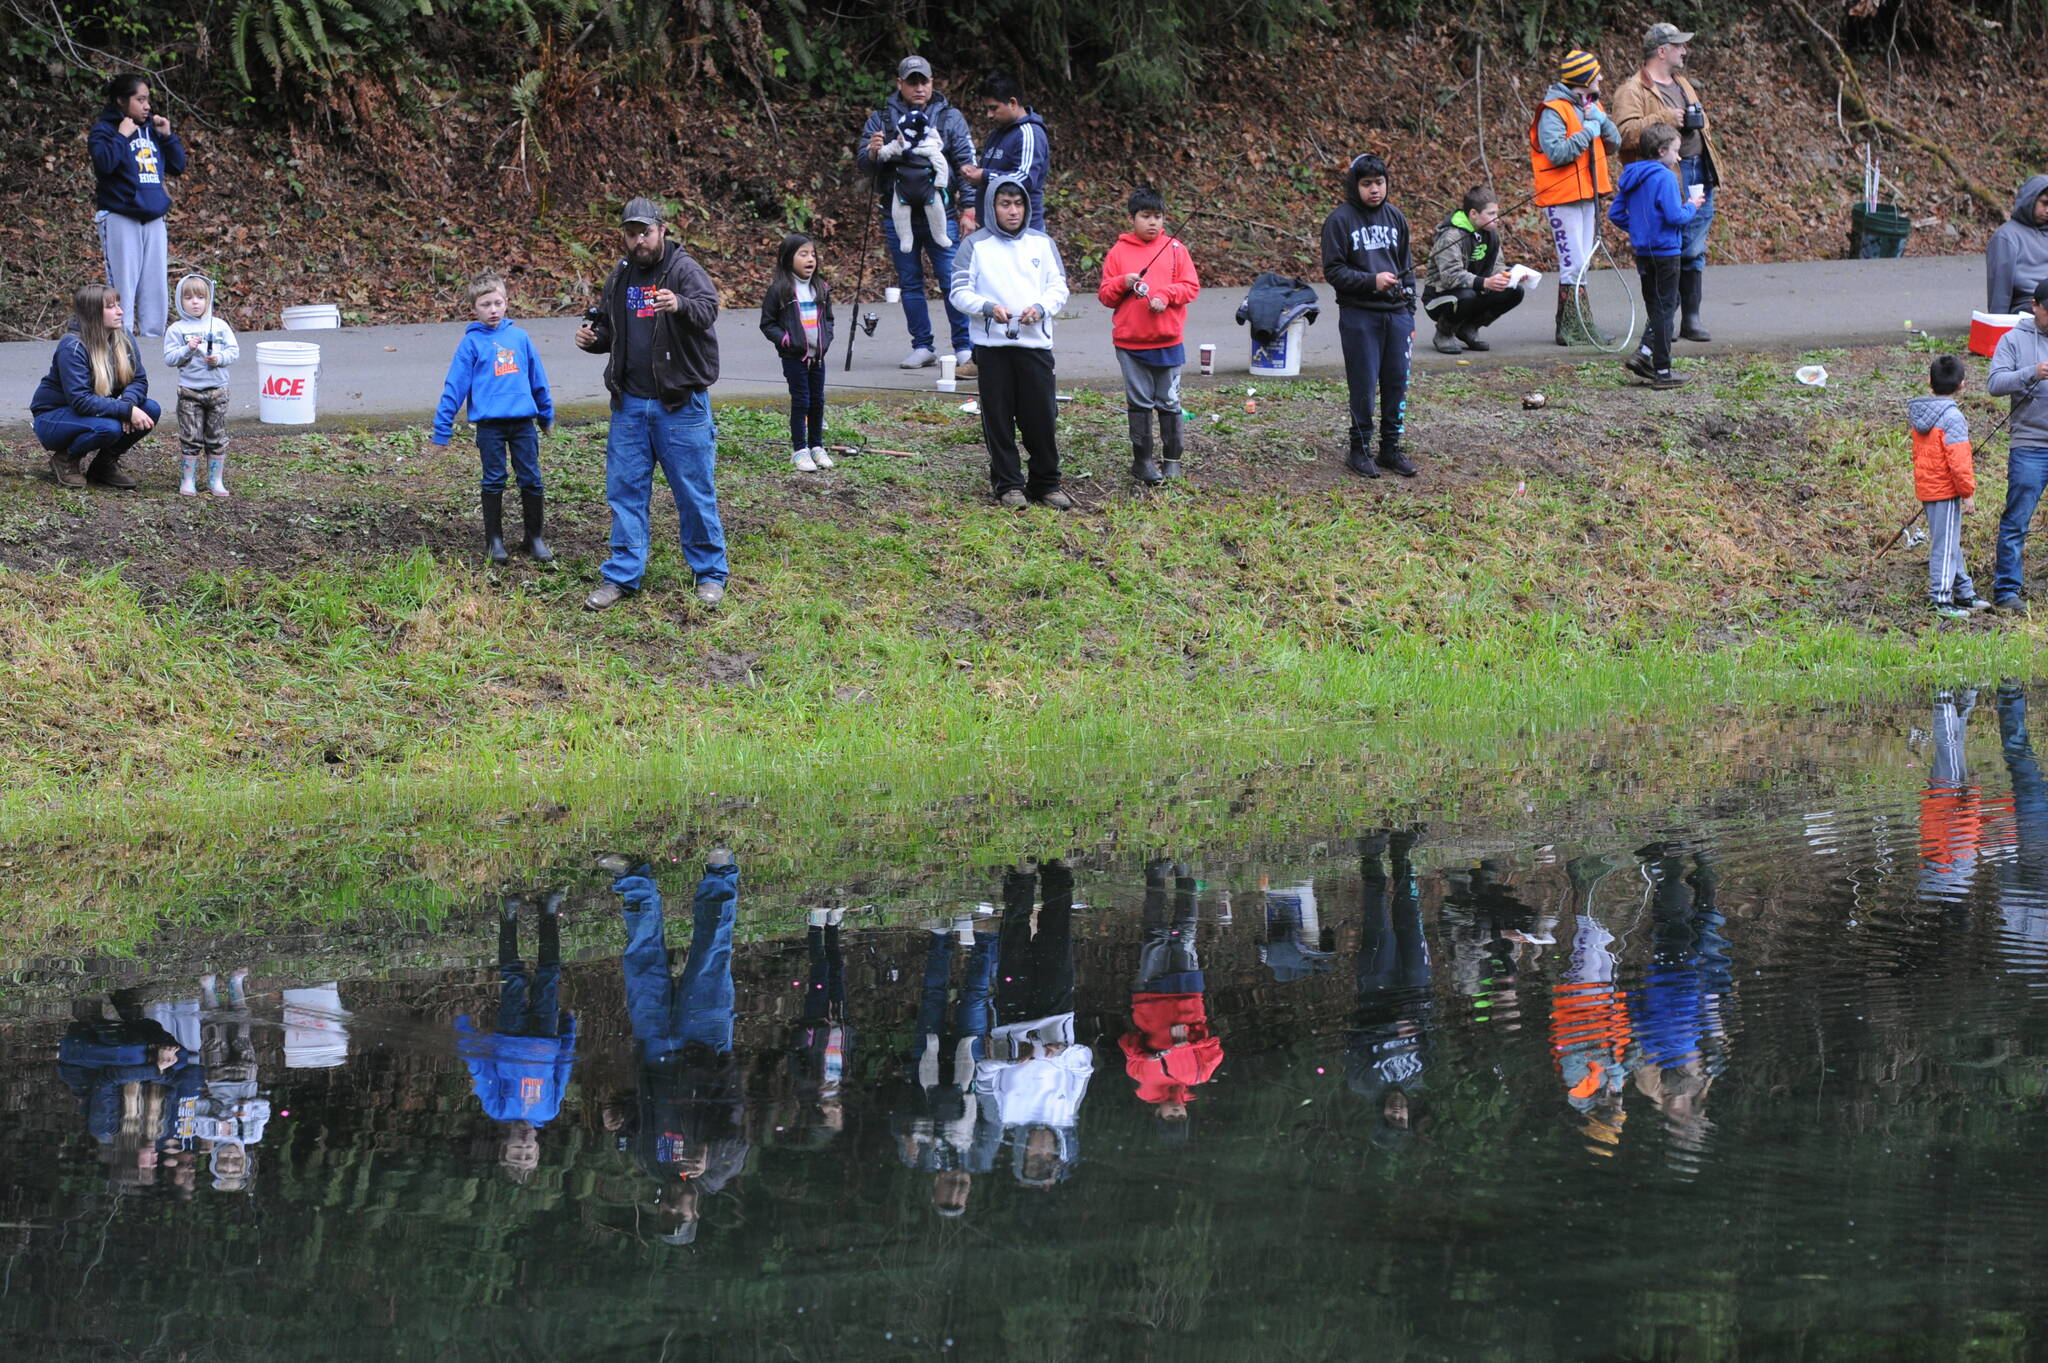 Fishermen were reflected in the pond on this overcast Kids Fishing Day …without rain.